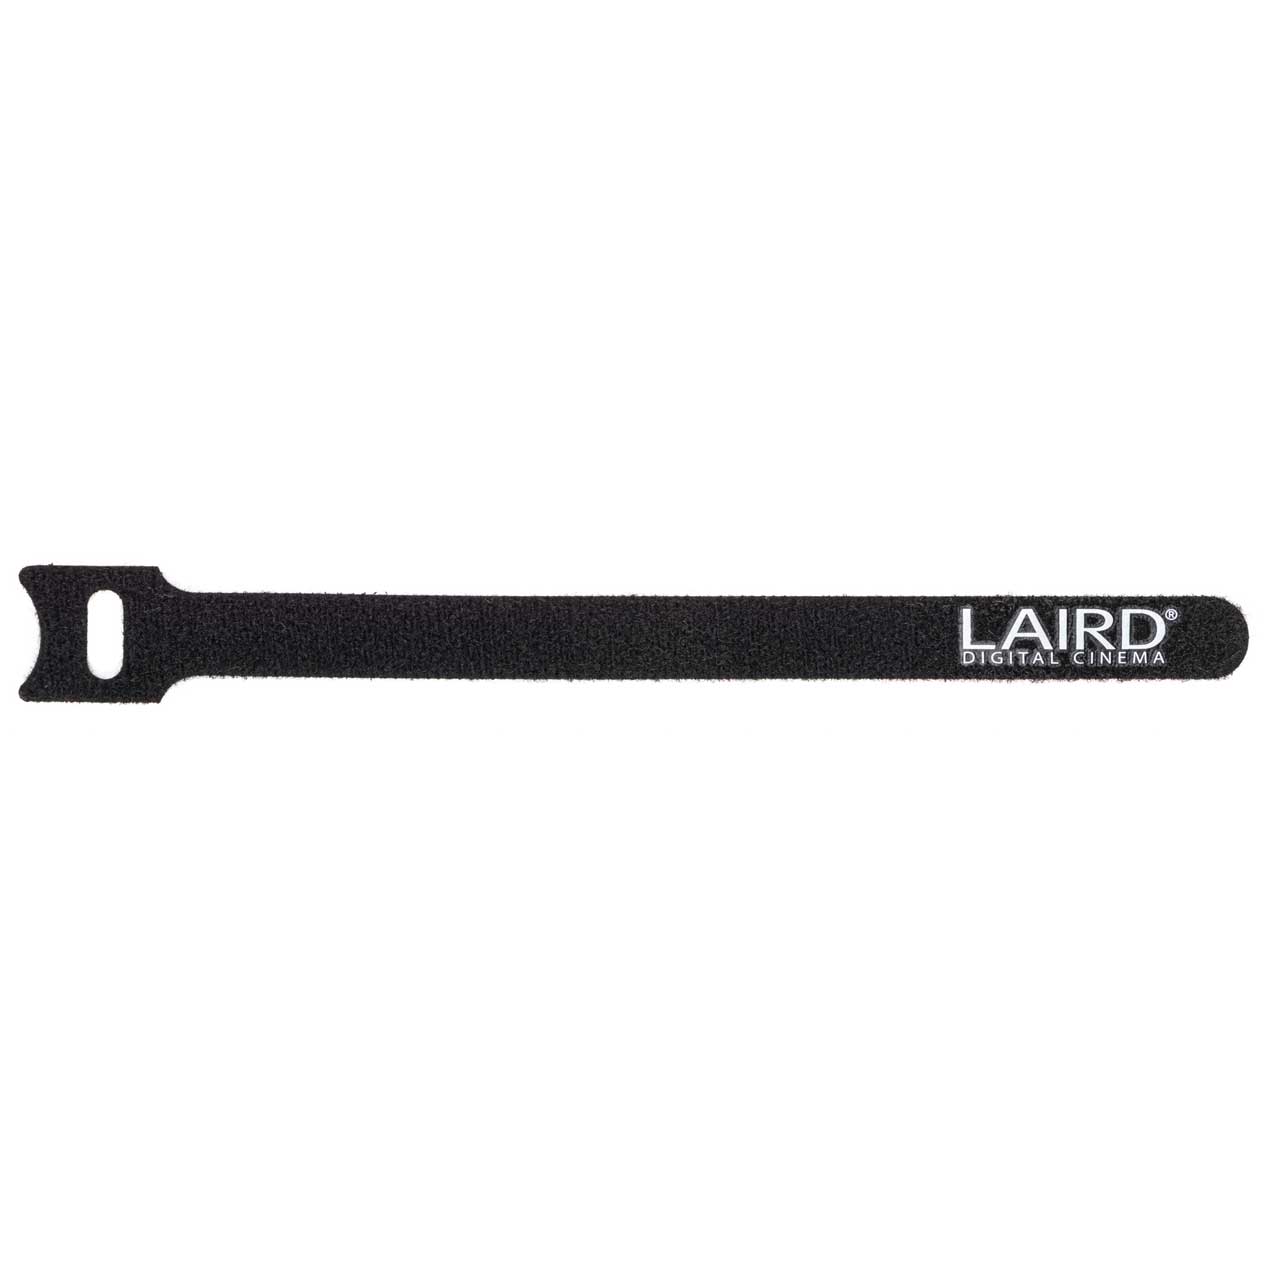 Laird Hook and Loop Cable Wrap 12mm x 180mm Black with White Logo - 100 Pack LDC-HKNLP-100PK